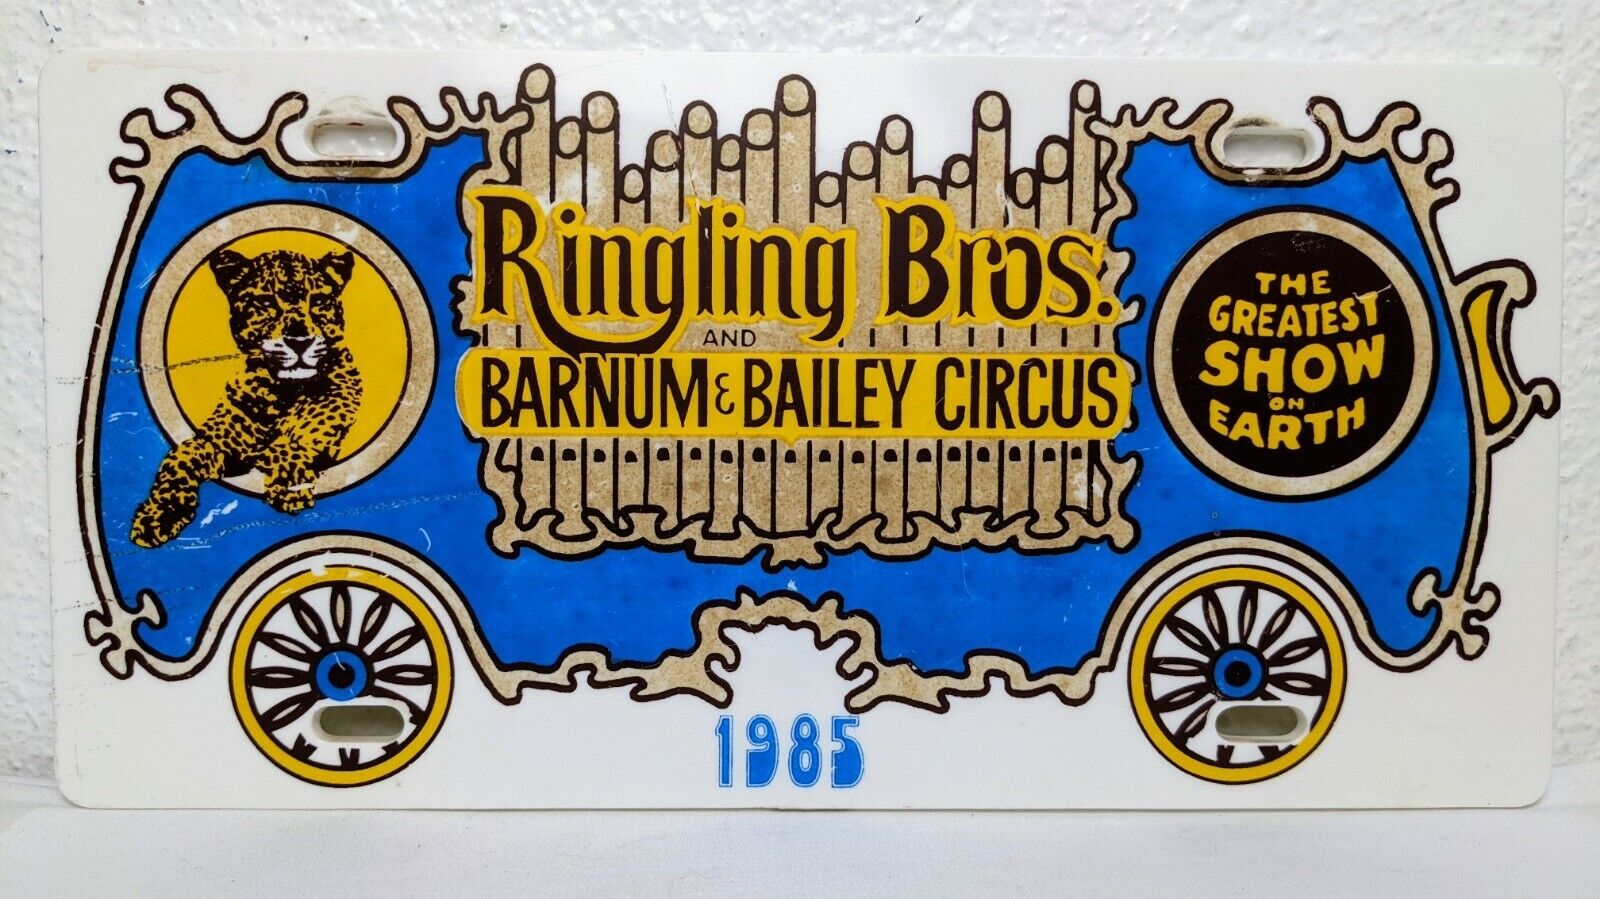 Vintage 1985 Ringling Bros Barnum & Bailey Circus Greatest Show License Plate